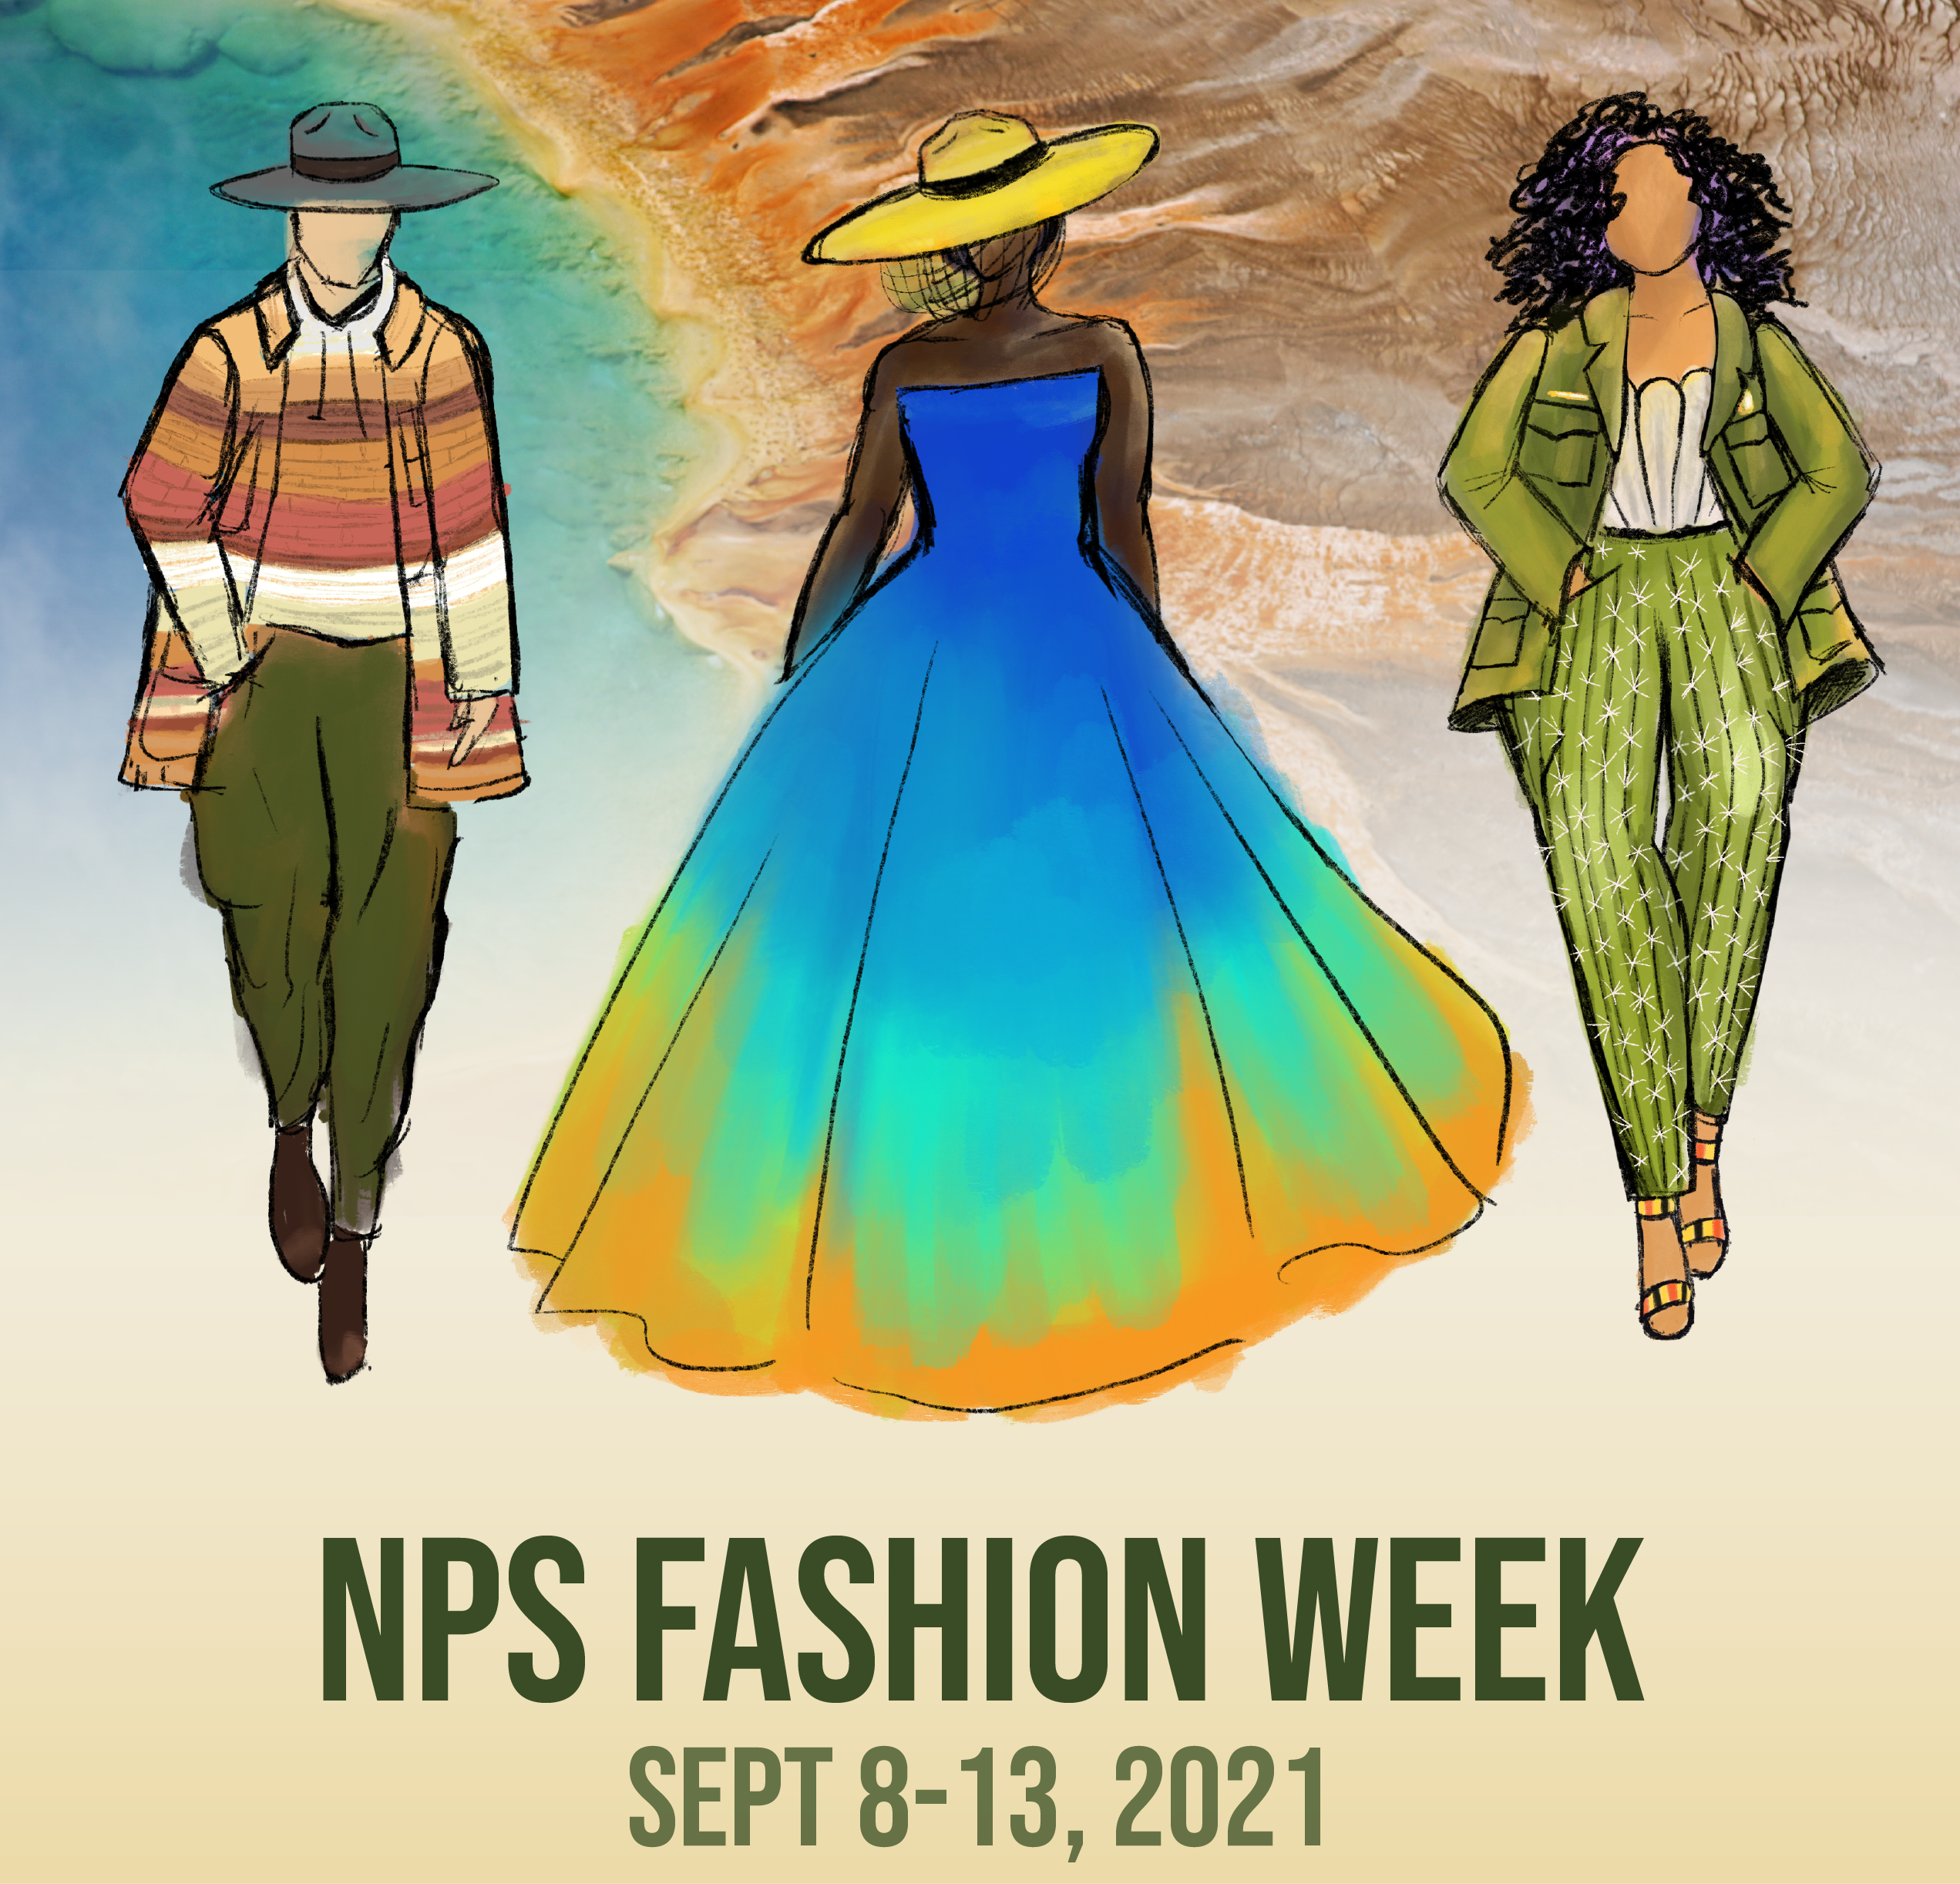 Fashion illustration announcing NPS Fashion Week from September 8-13 2021.